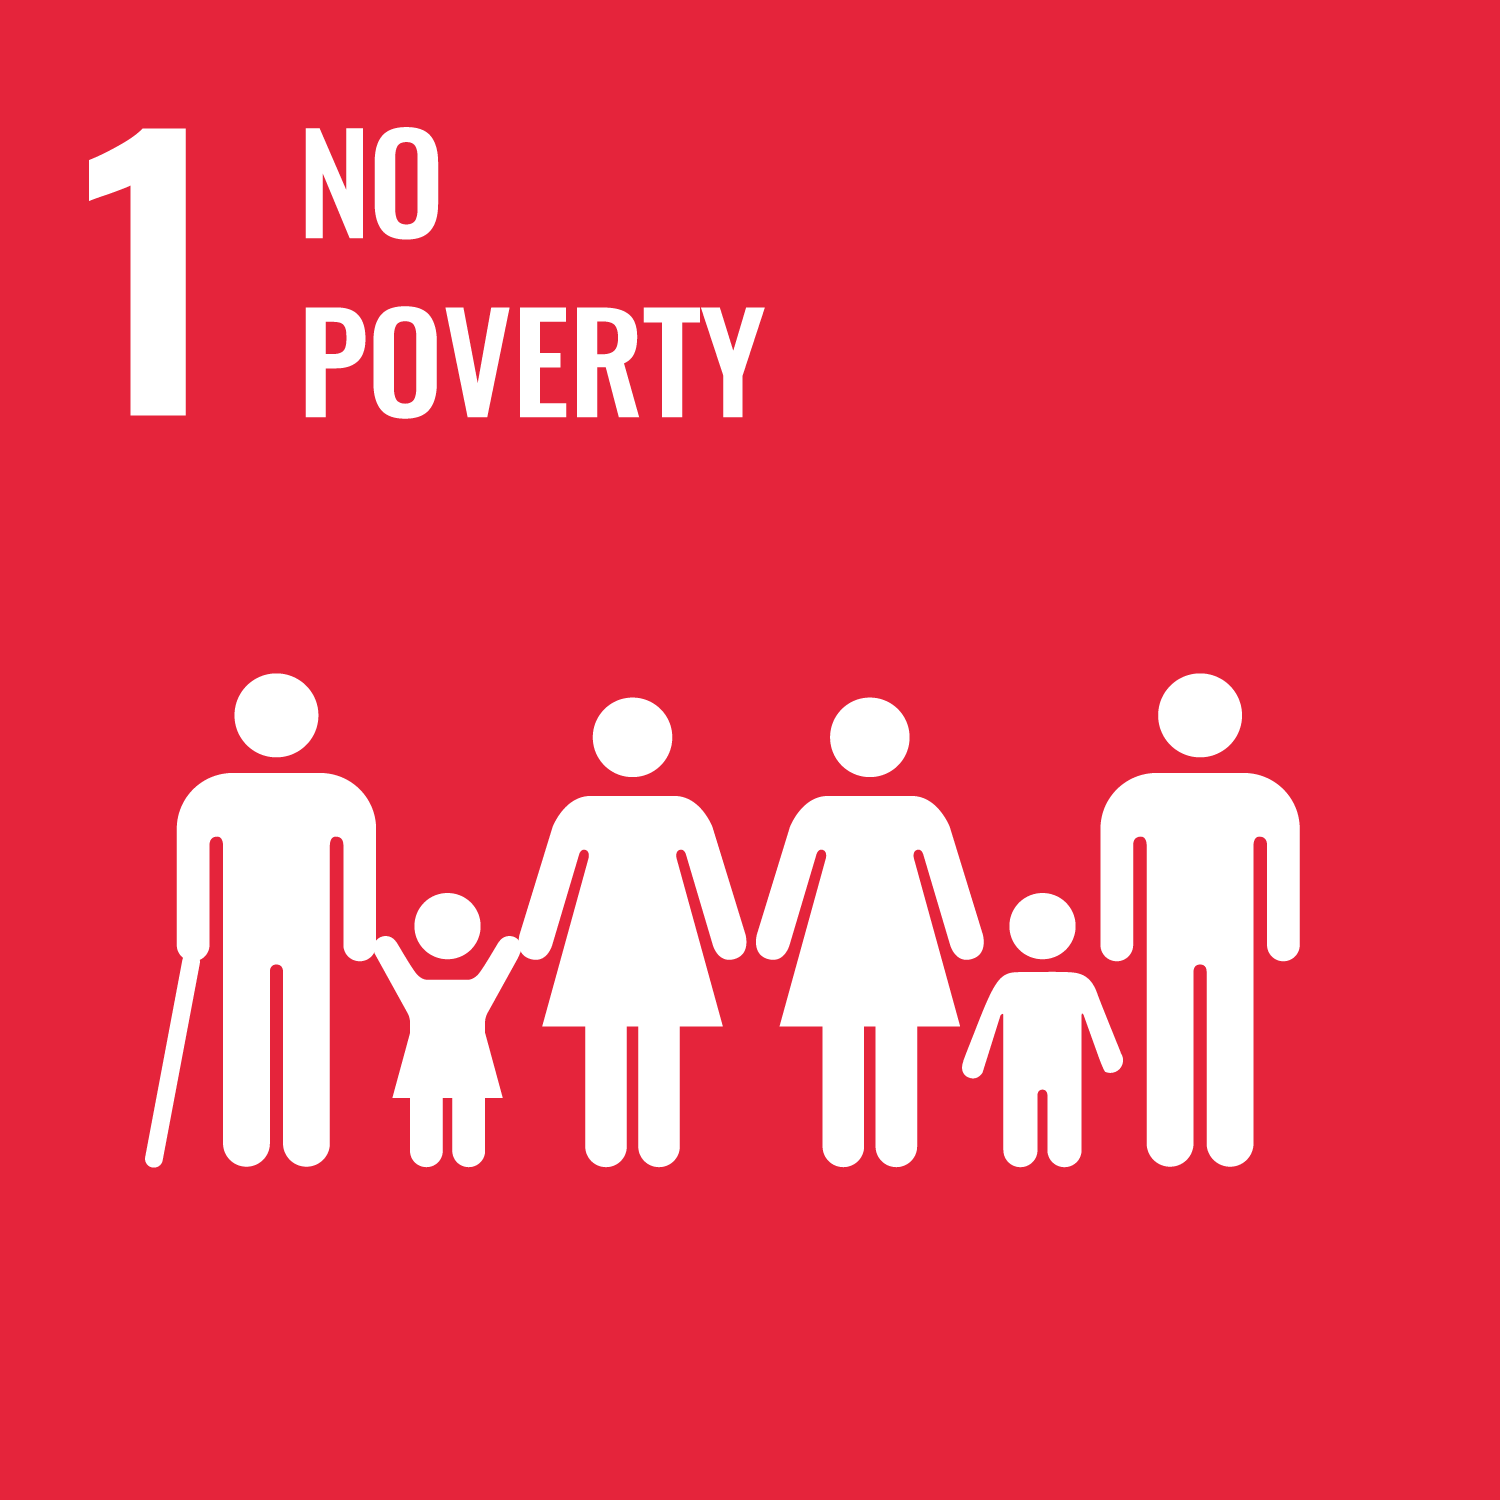 United Nation's 17 Sustainable Development Goals: Goal Number 1: No Poverty